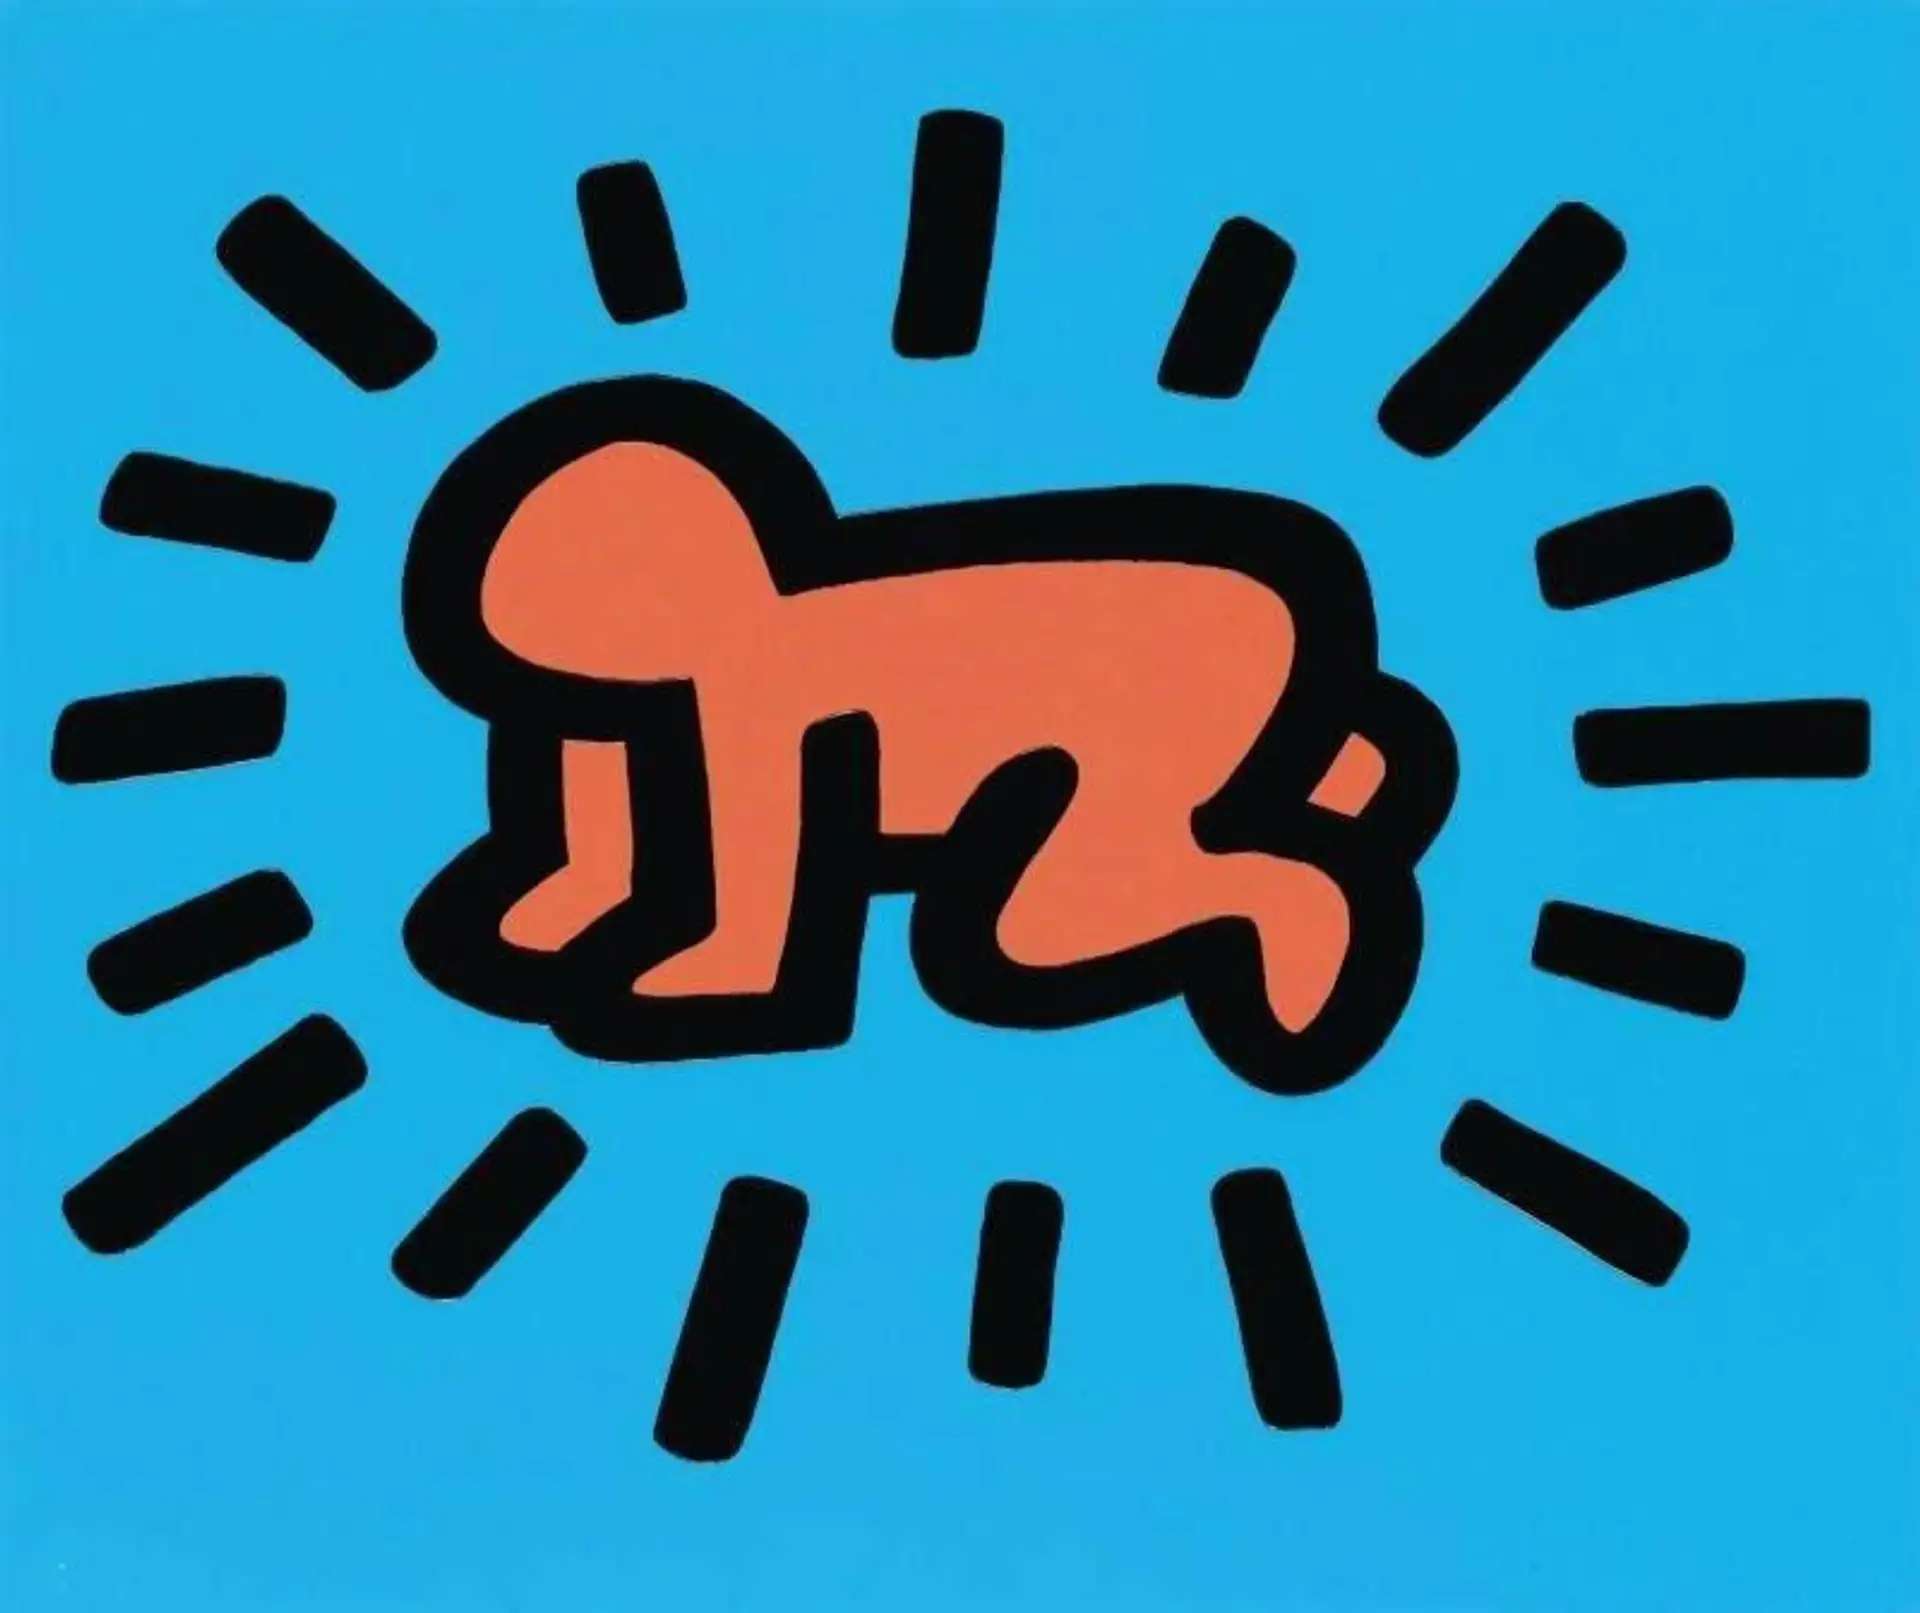 Radiant Baby by Keith Haring